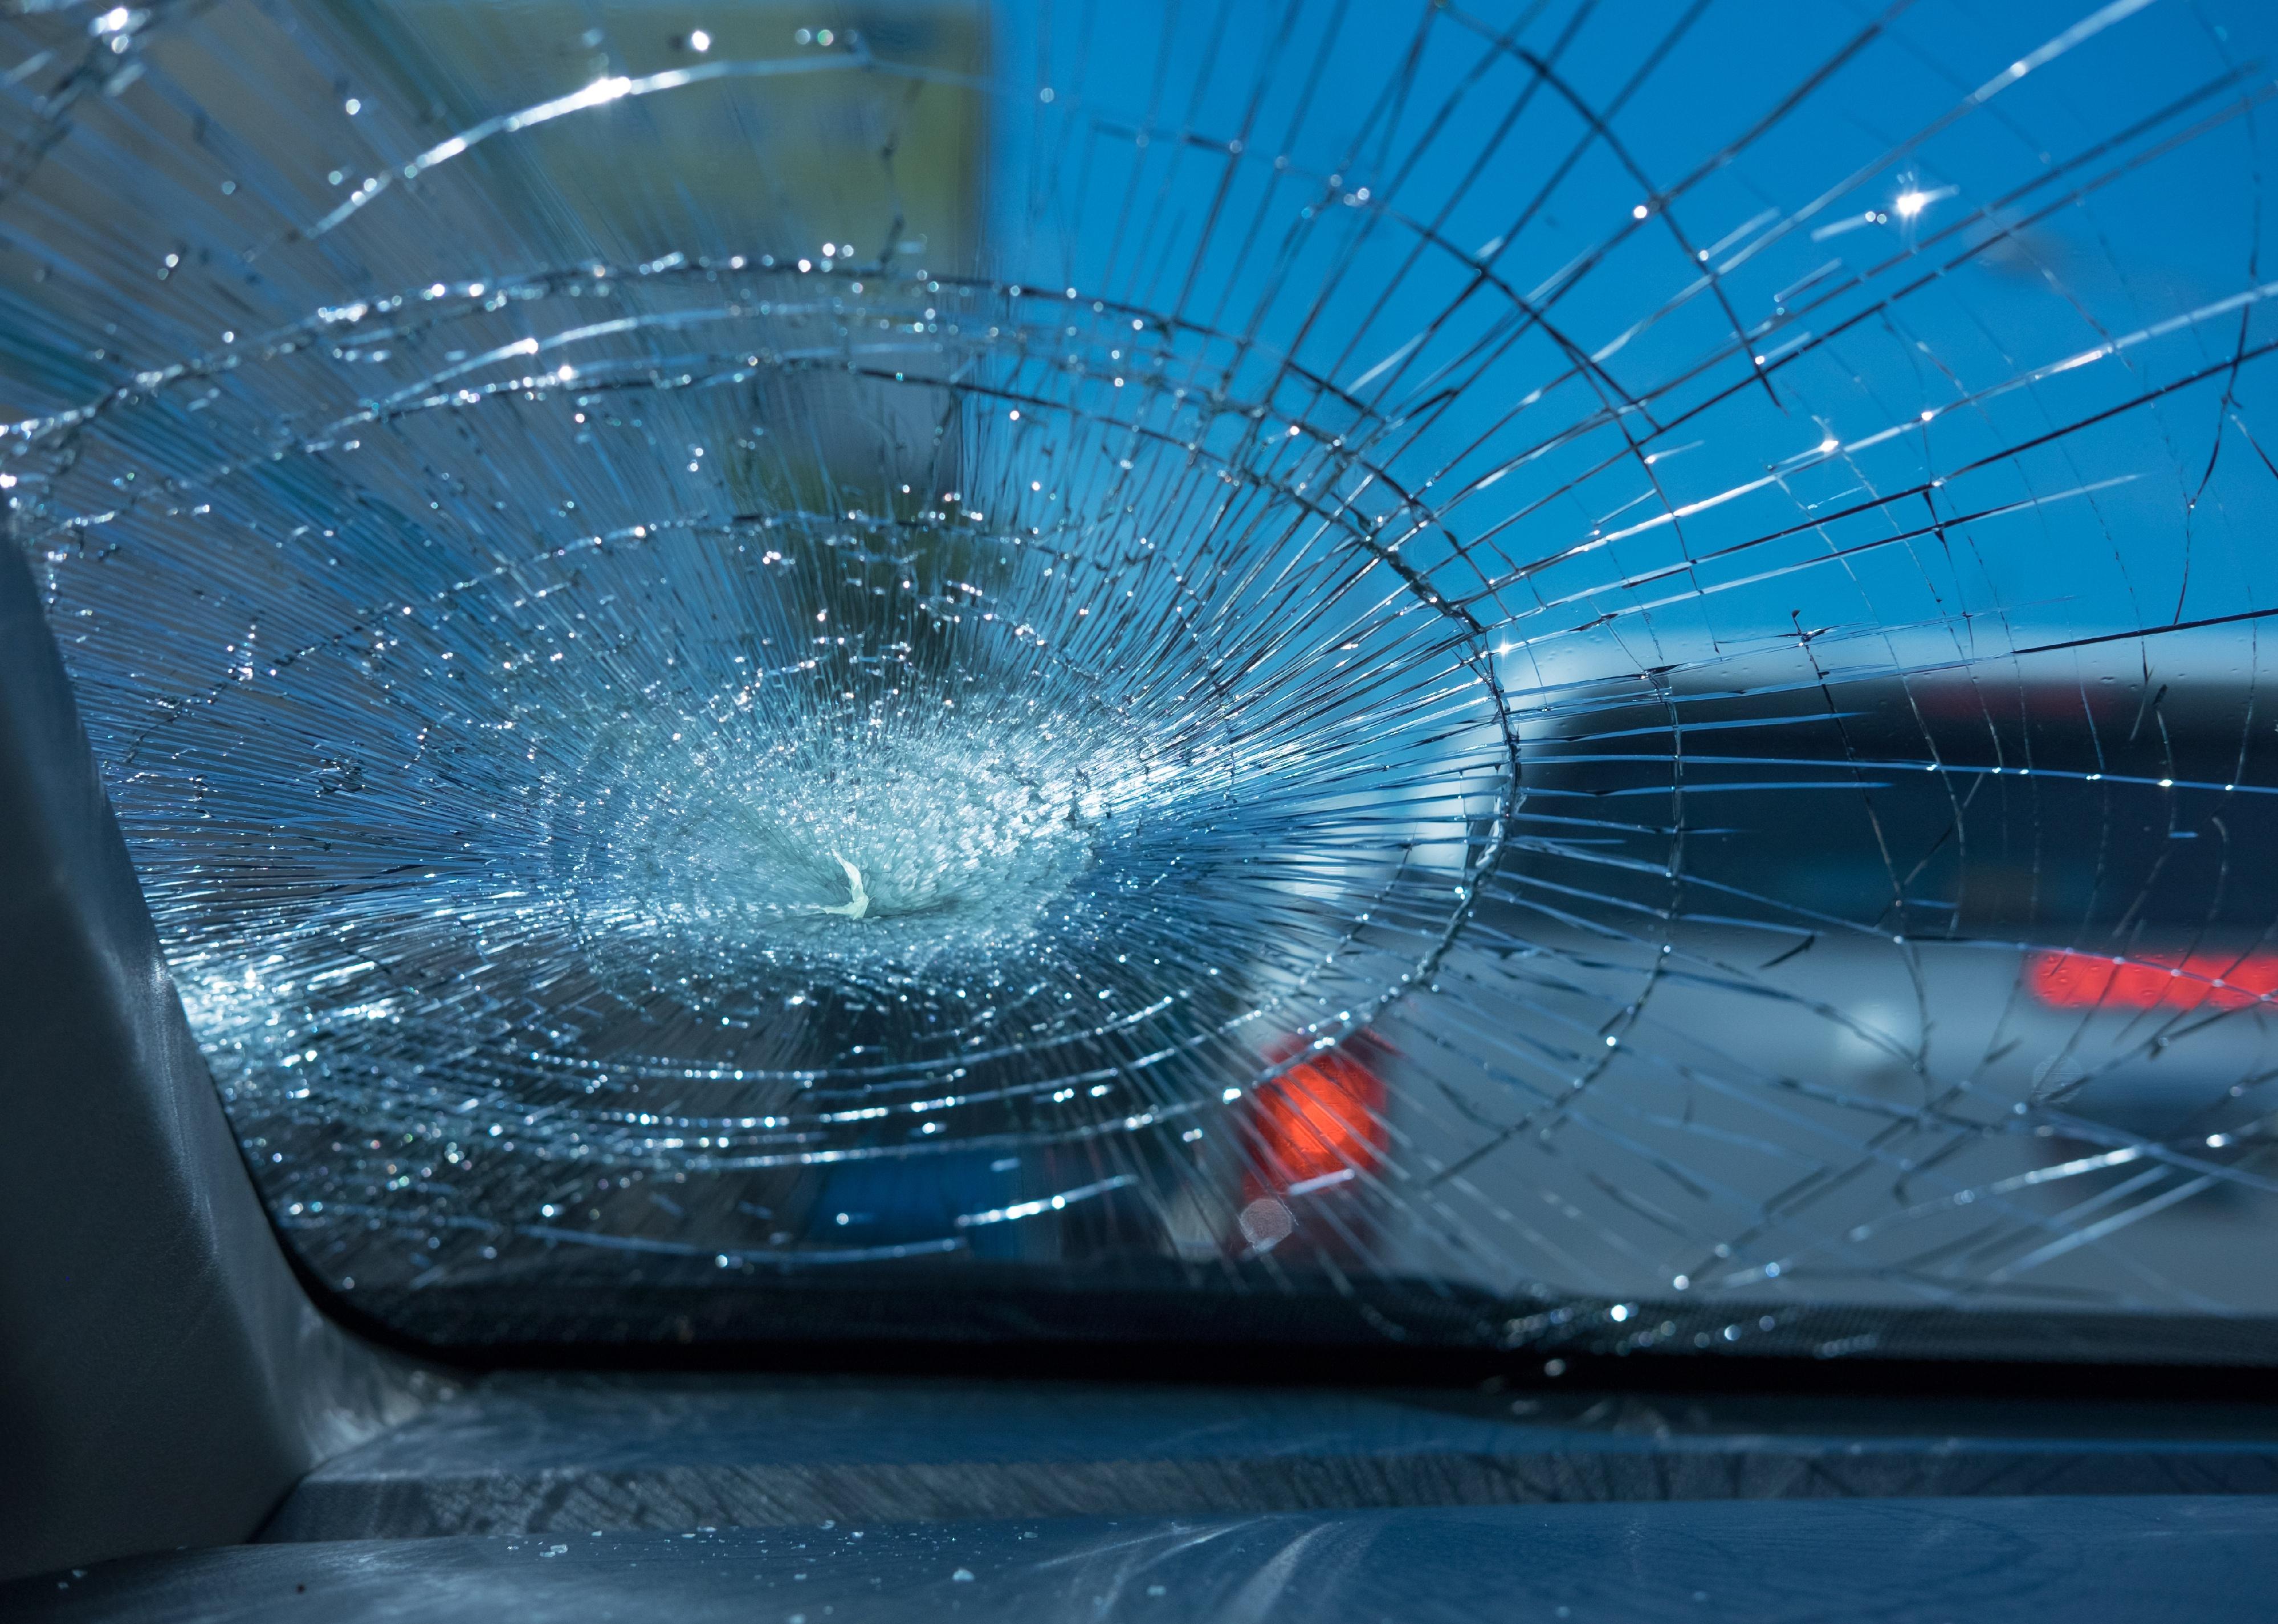 Inside of a car with shattered glass.